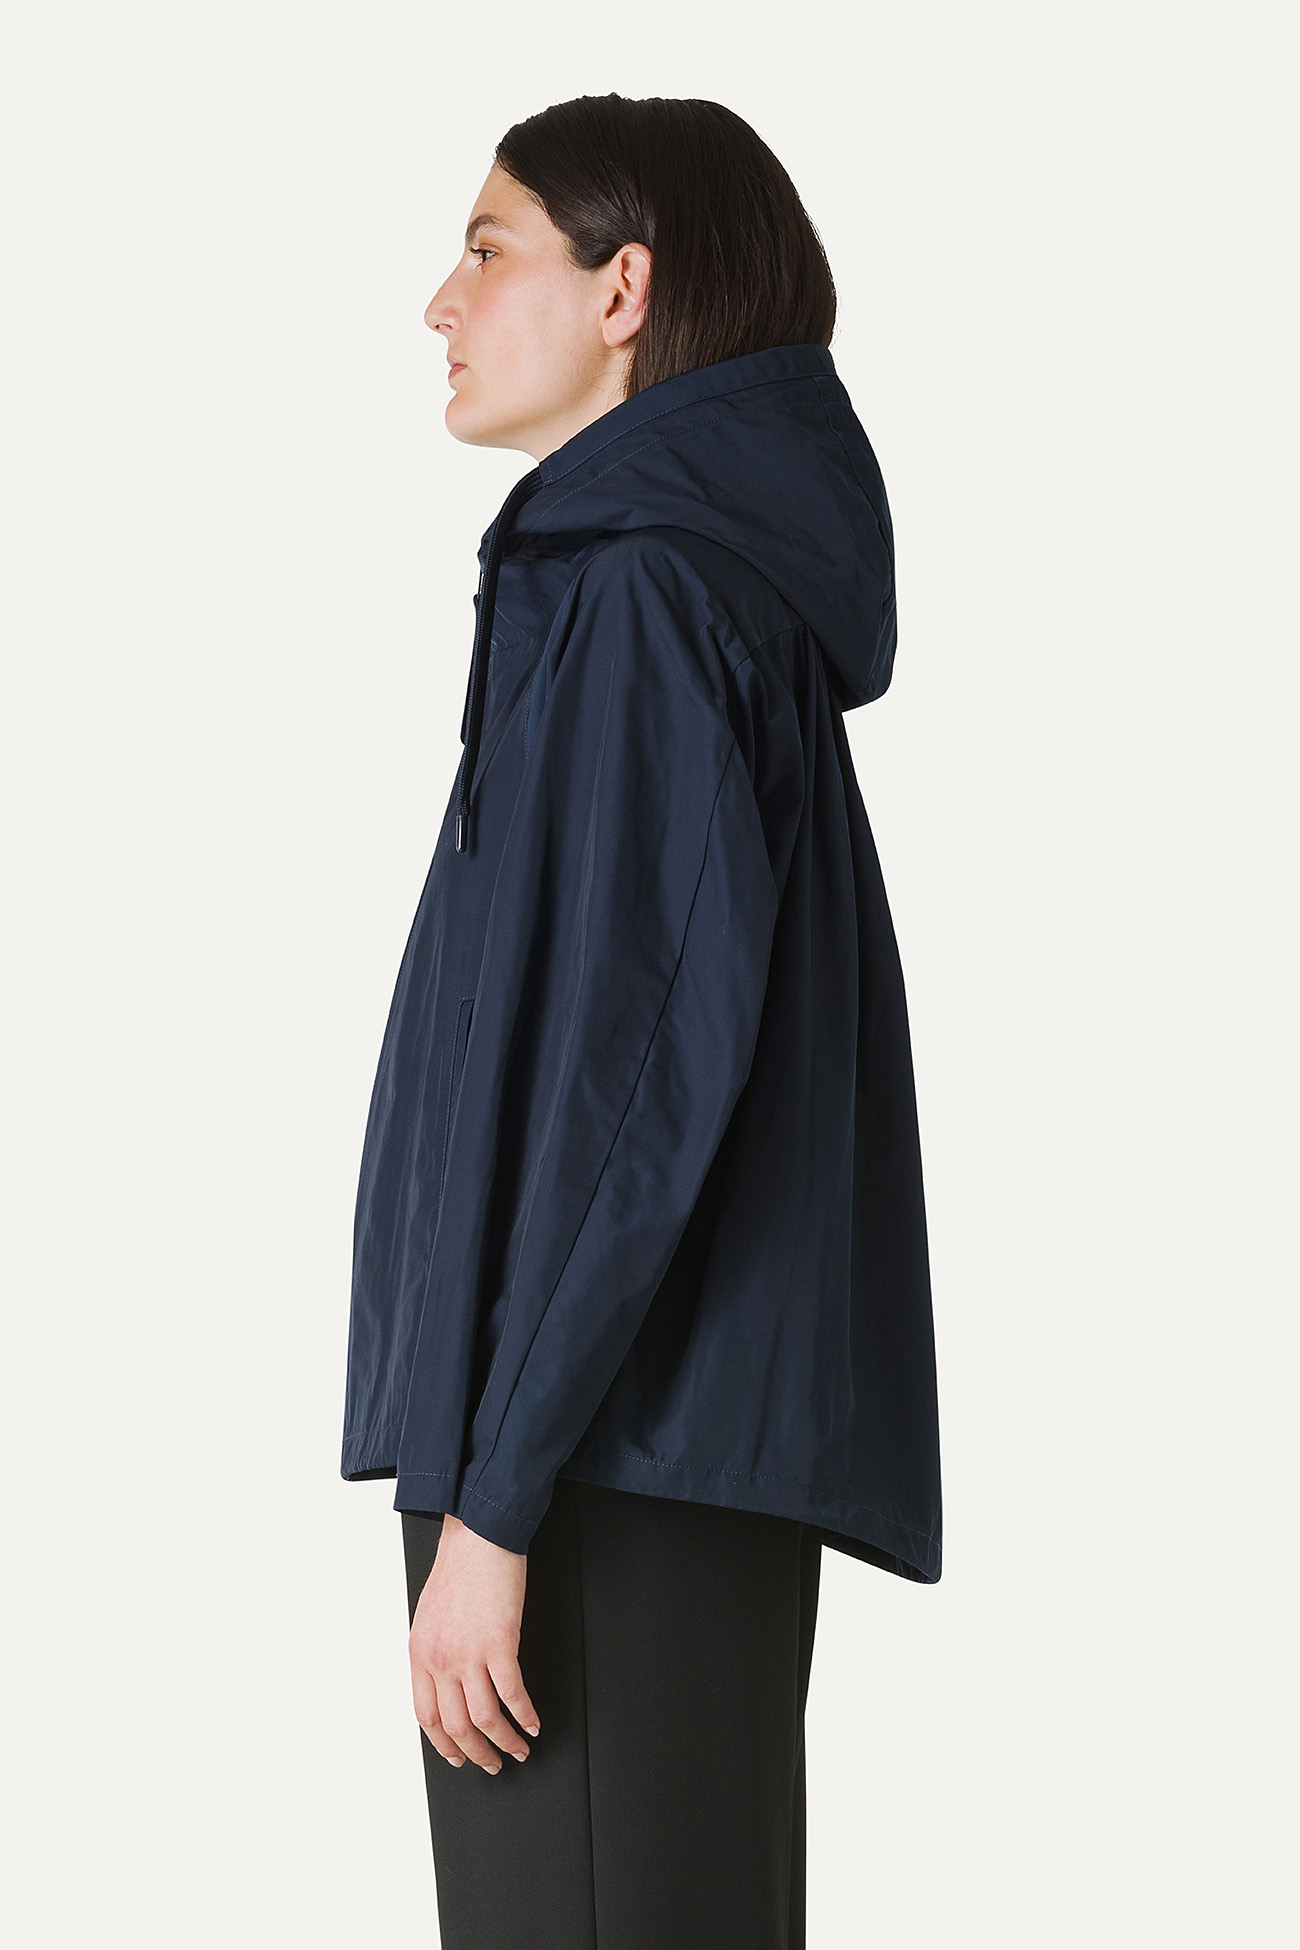 SHORT JACKET IN MEMORY NYLON WITH GATHERED BACK 9139 - MIDNIGHT BLUE - OOF WEAR